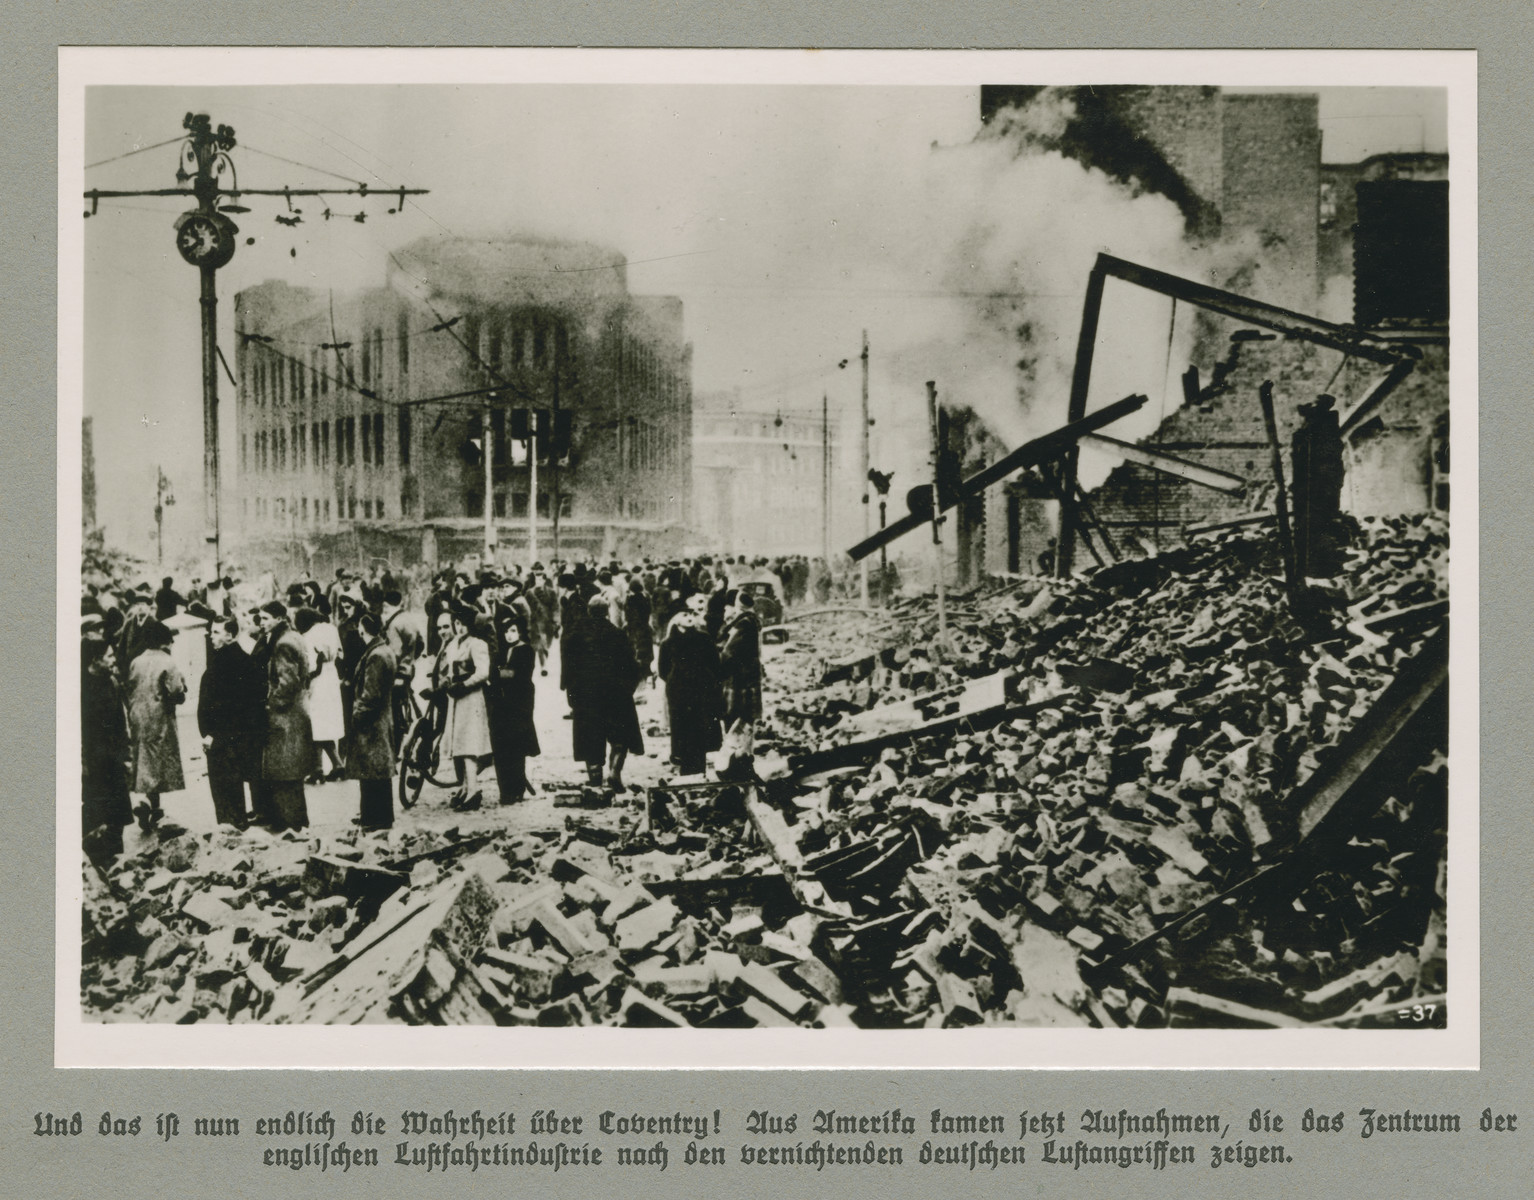 Men and women stand behind piles of rubble in a bombed out city quarter. 

Original caption reads: And finally the truth about Coventry! Images have come out of America that depict the center of the English aircraft industry after the devastating German airstrikes.